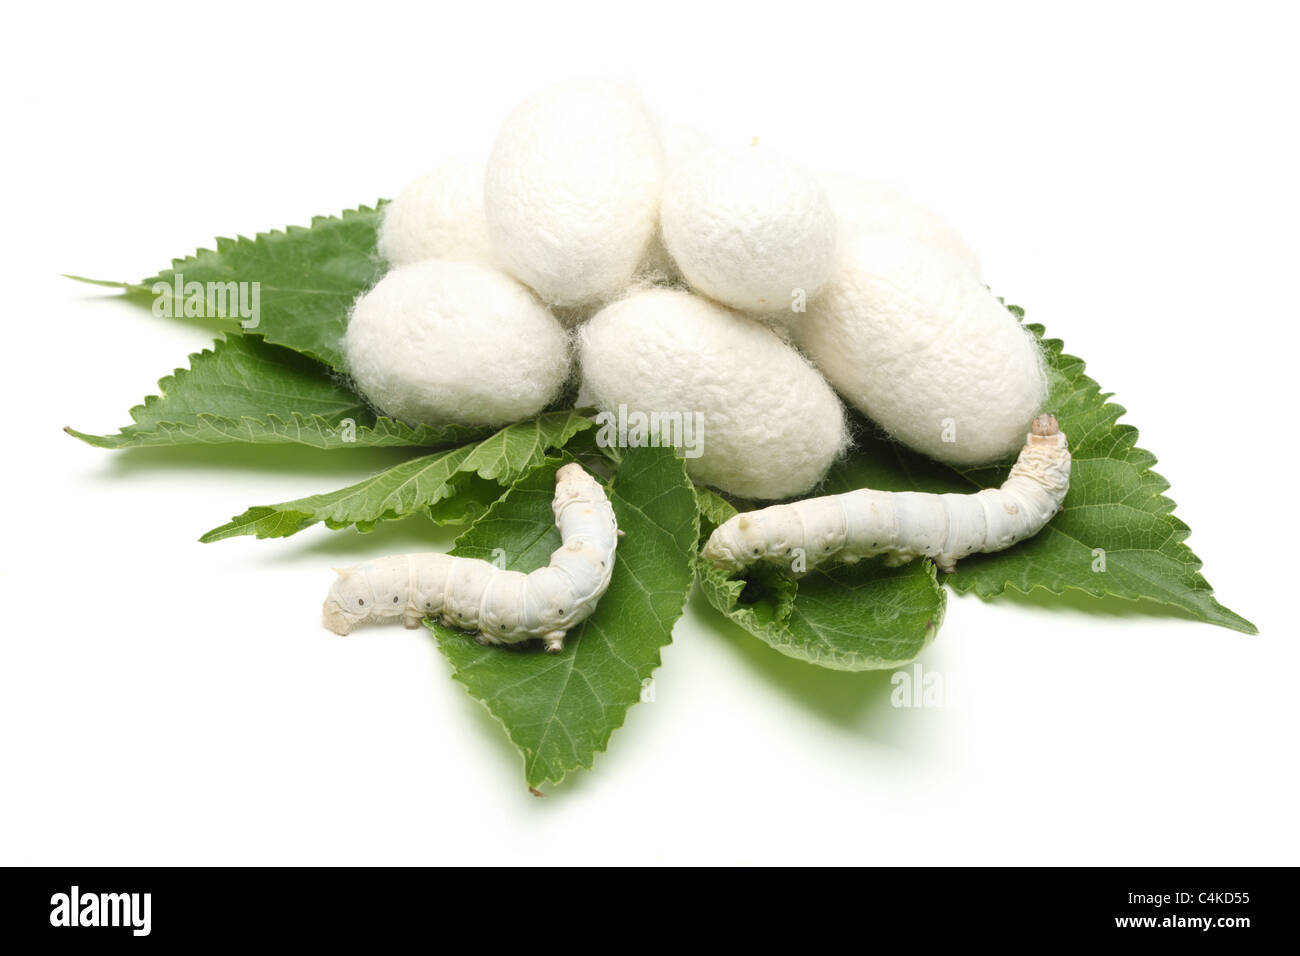 Silk Cocoons with Silk Worm on Green Mulberry Leaf.Isolated on White. Stock Photo